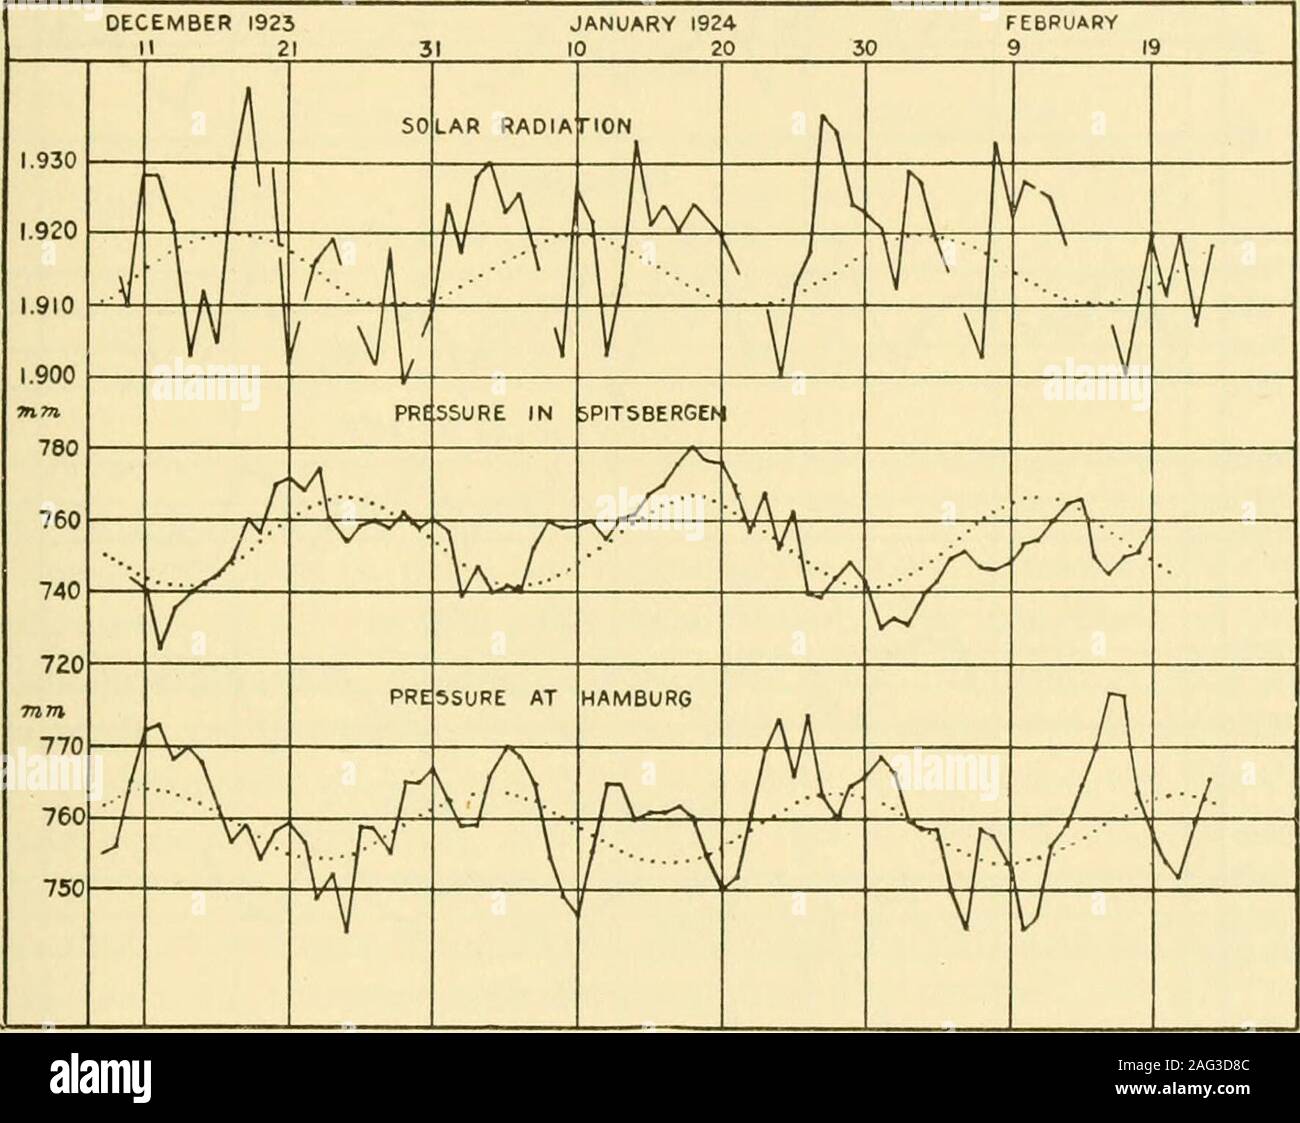 . Smithsonian miscellaneous collections. Fic. 20.—13.6-day period in solar radiation and pressure. NO. 7 THE ATMOSPHERE AND THE SUN CLAYTON 31 Figure 21 shows the observed values of solar radiation duringDecember, 1923, and January and February, 1924, These values arecompared with the observed values of pressure at Spitzbergen andat Haml)urg. A 24-day period of oscillation is evident in each caseand this oscillation is shown by the dotted curves computed fromthe data in each case by harmonic analysis. Pressure data from all. Fig. 21.^24-day period in solar radiation and pressure. over the nort Stock Photo